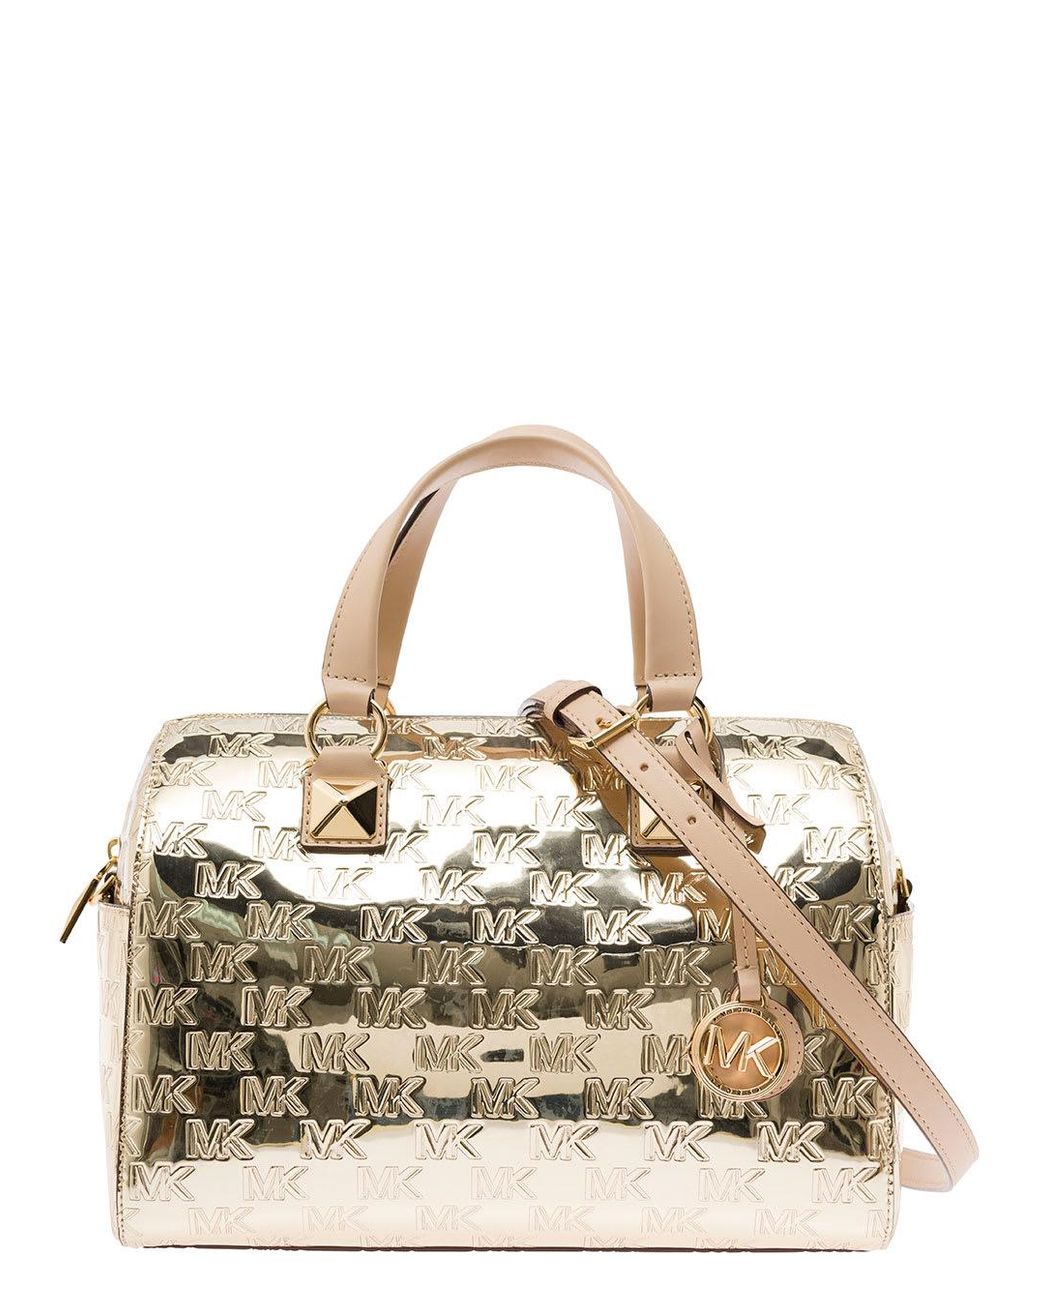 What do you guys think of this MK bag? I know a lot of people don't care  for Michael Kors bags, but this one seemed interesting/unique enough for  me. I really like